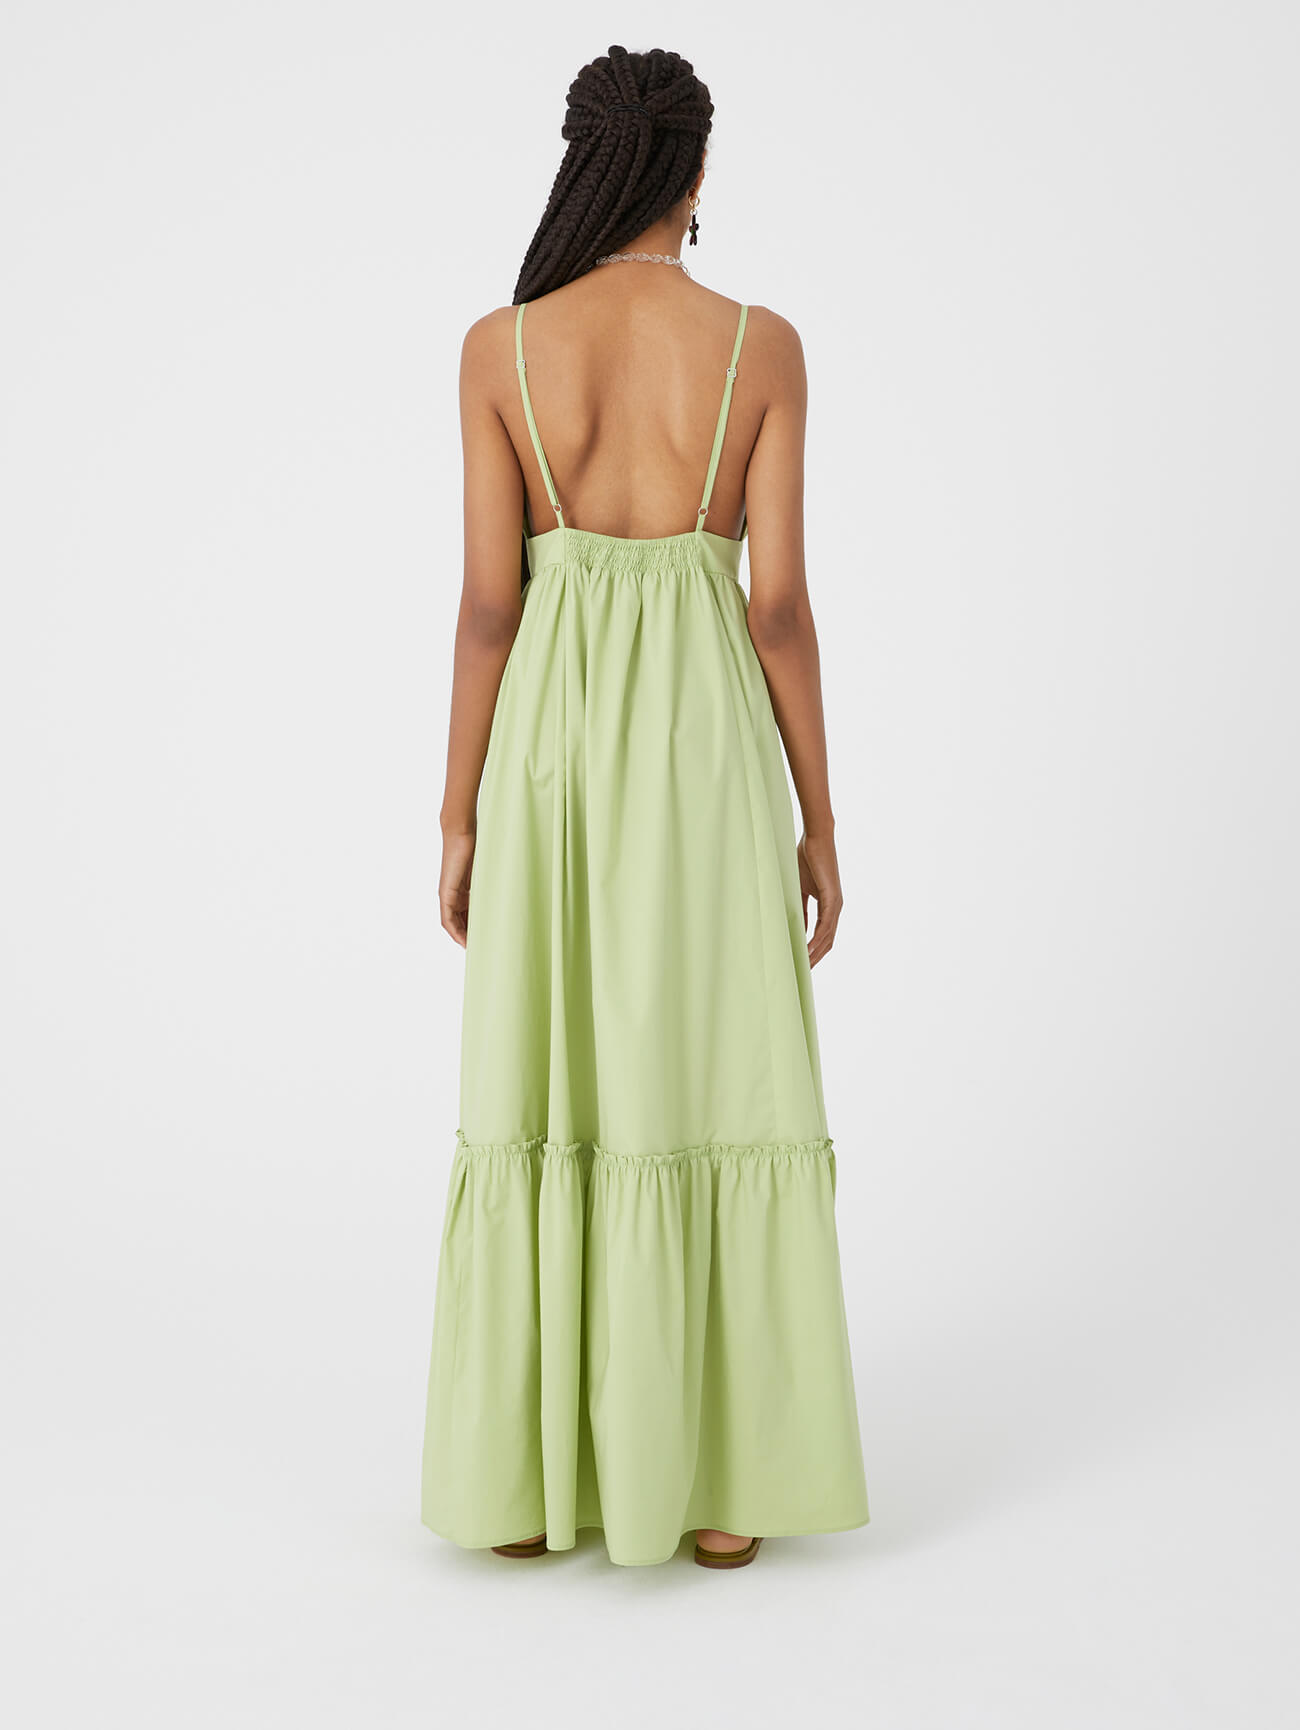 matcha long dress with embroidery